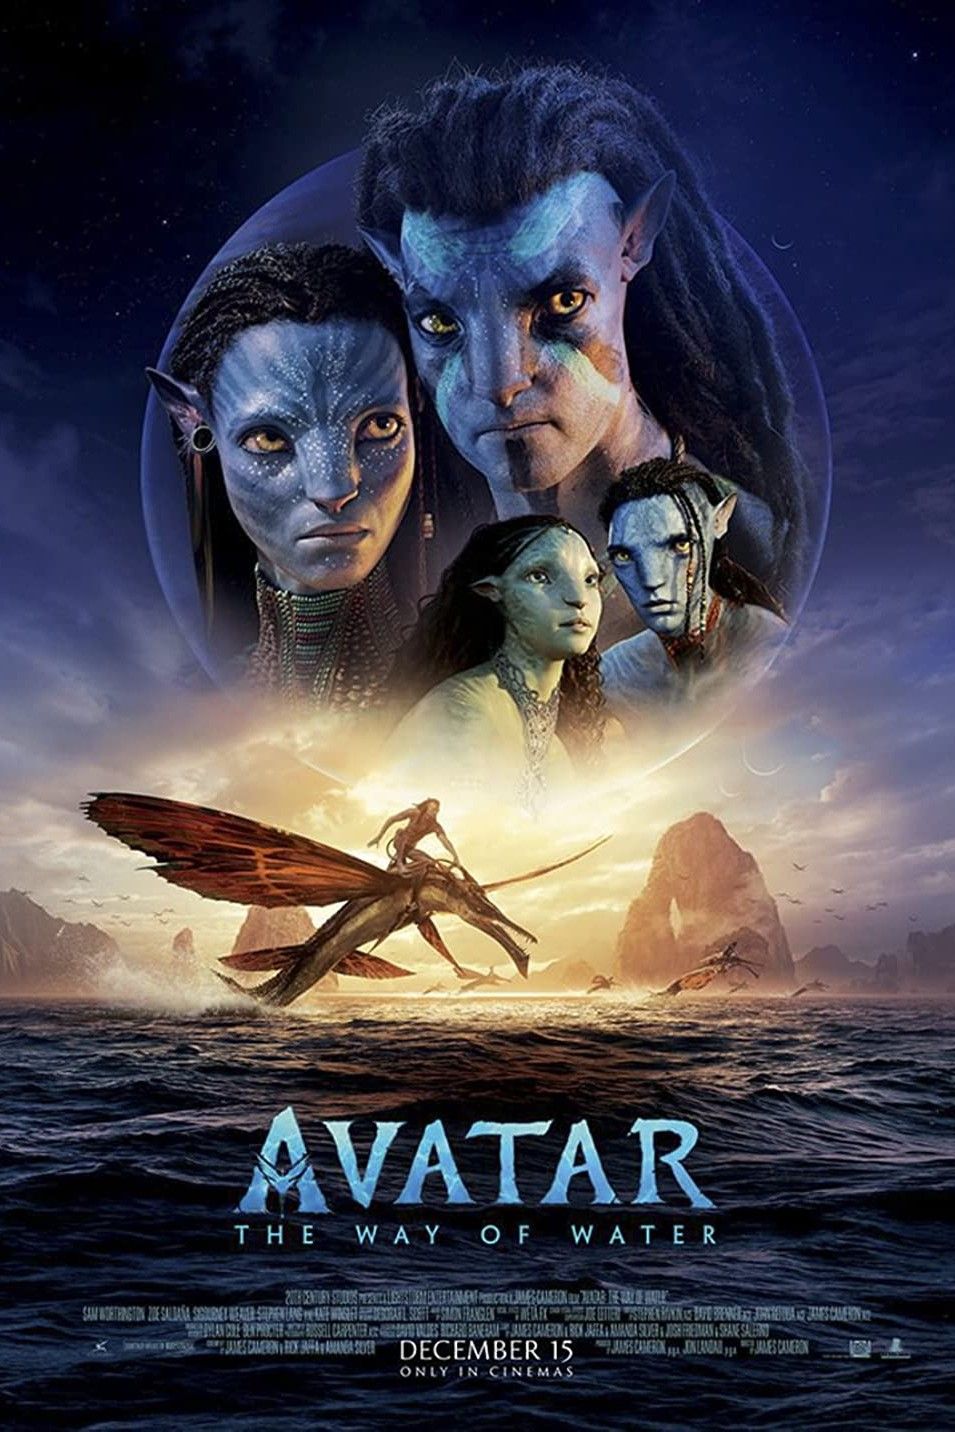 Avatar The Way Of Water Review Overlong But Stunning Sequel Is Worth The Wait 3663